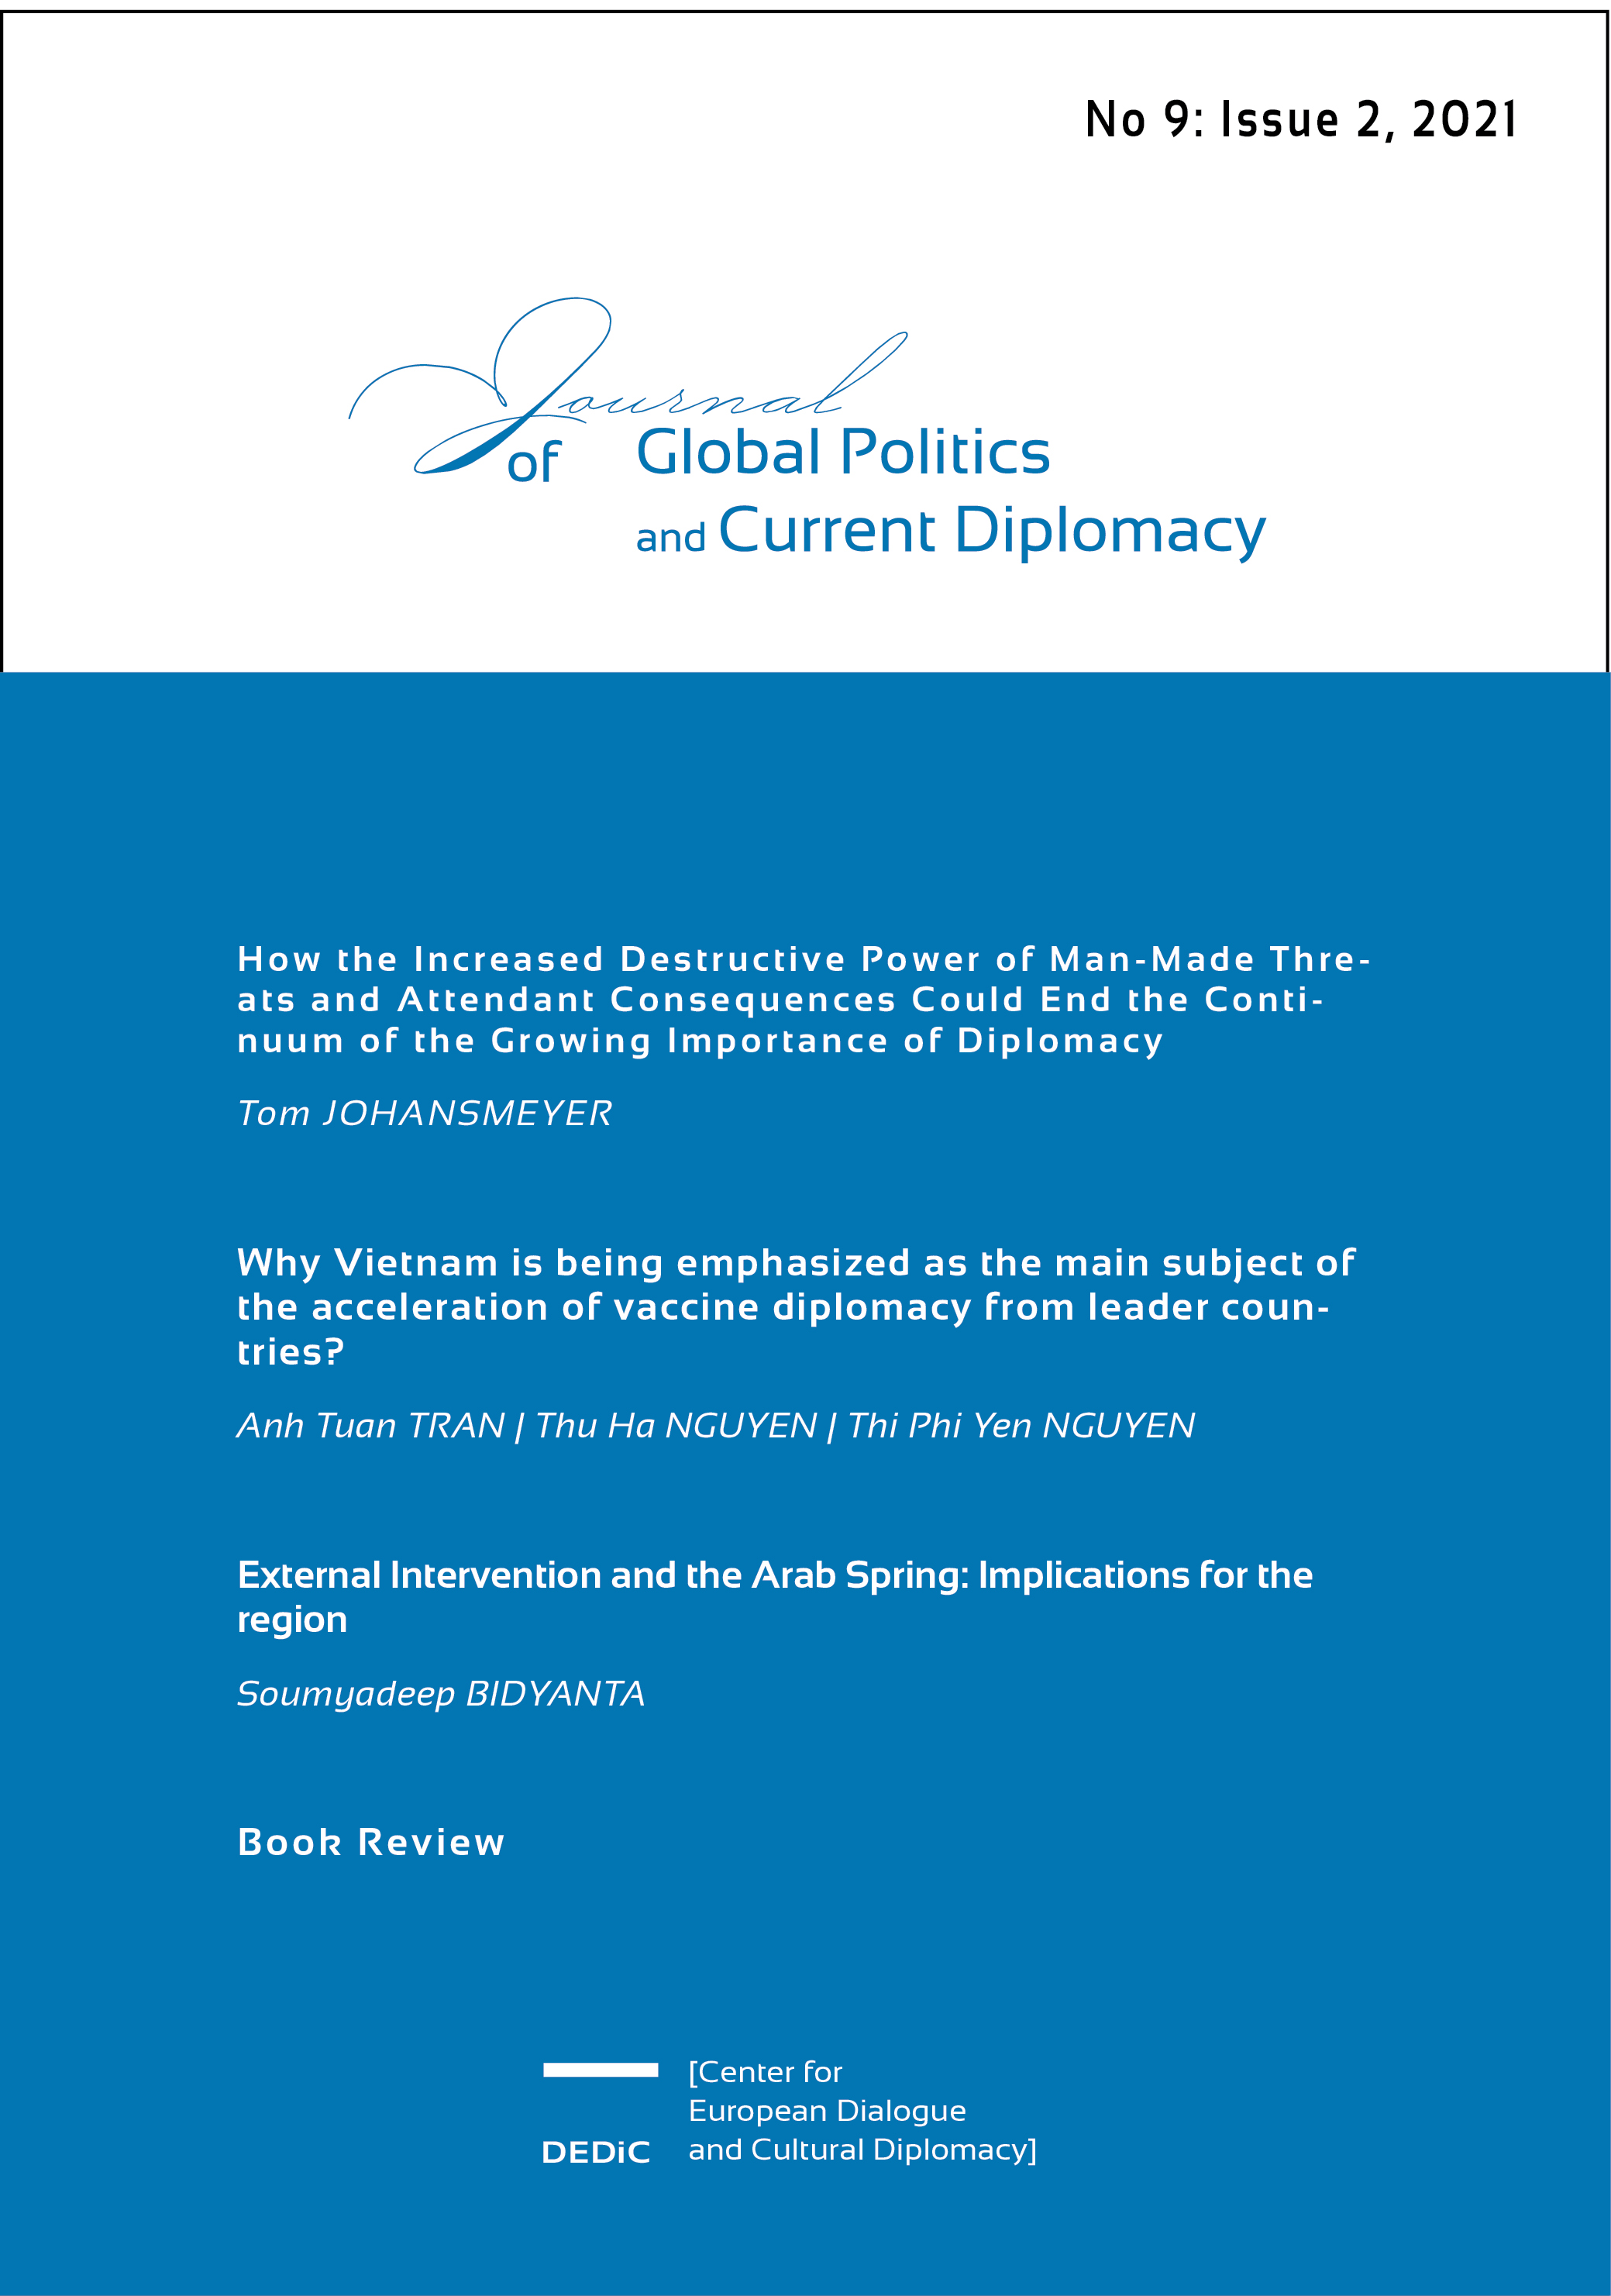 External Intervention and the Arab Spring Cover Image